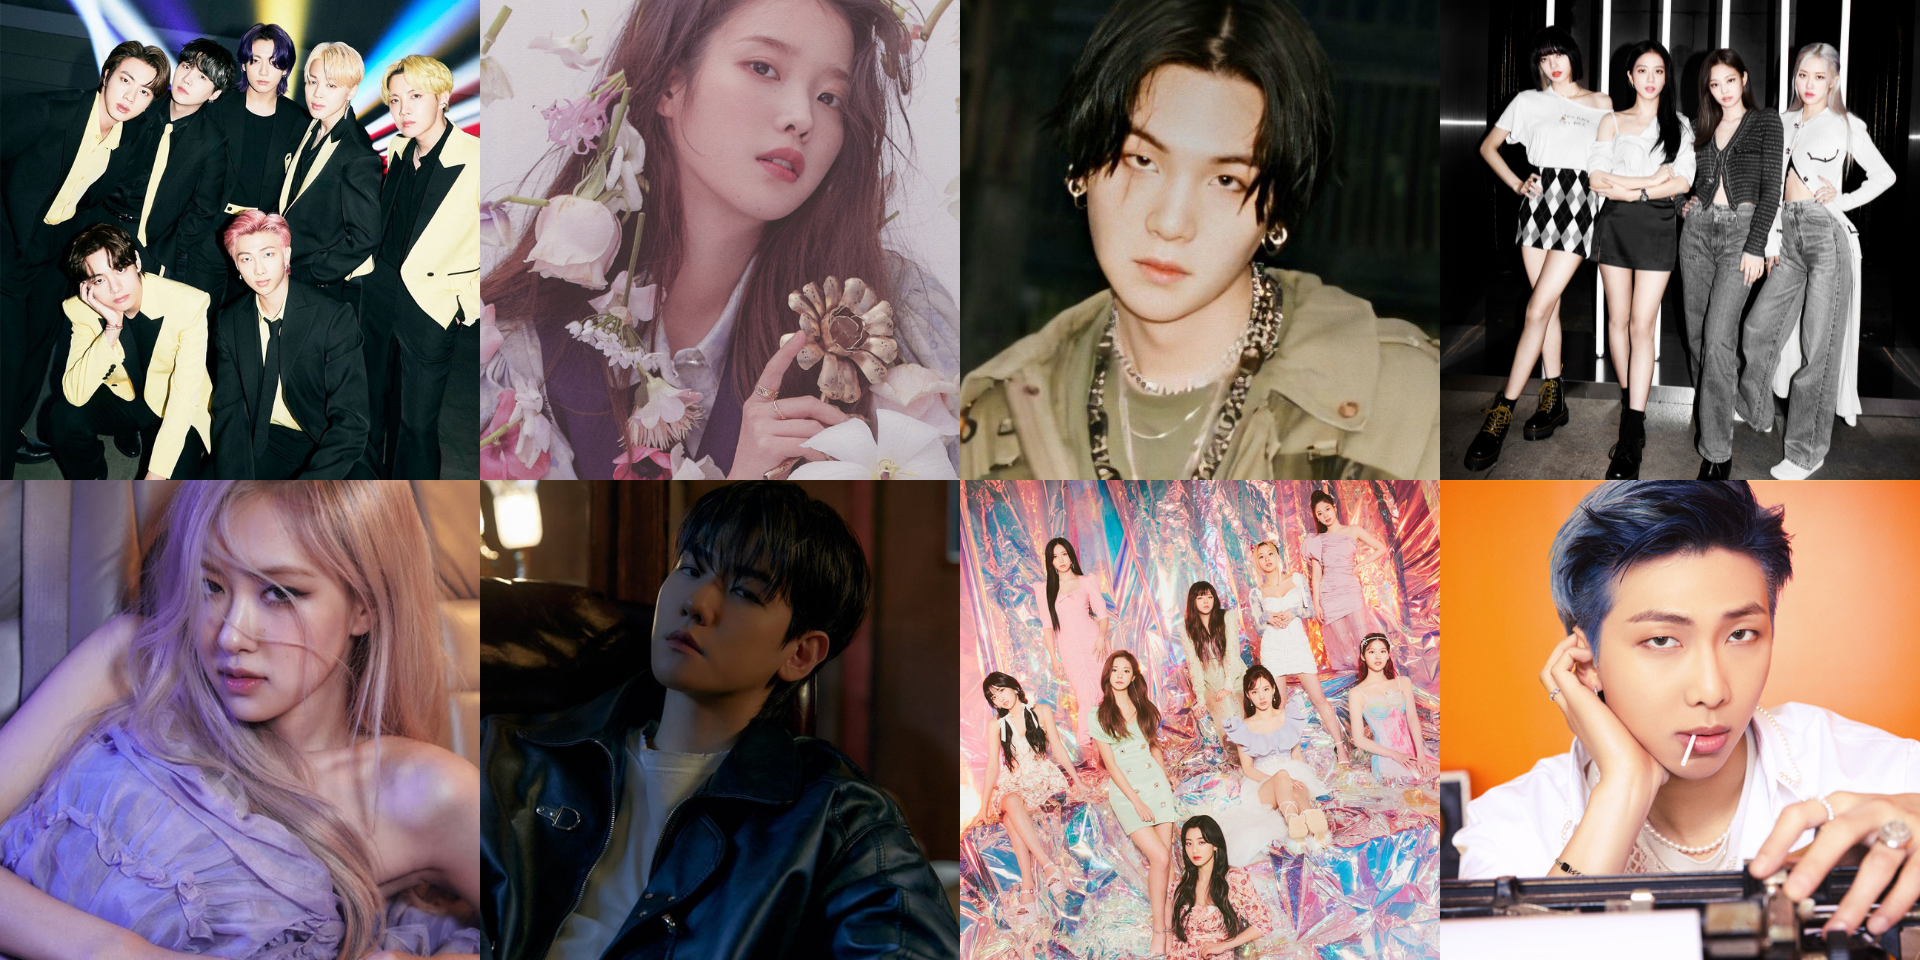 Spotify unwraps Top K-pop artists, songs, albums of 2021 – BTS, TWICE, IU, BLACKPINK, Agust D, ROSÉ, Baekhyun, RM, and more